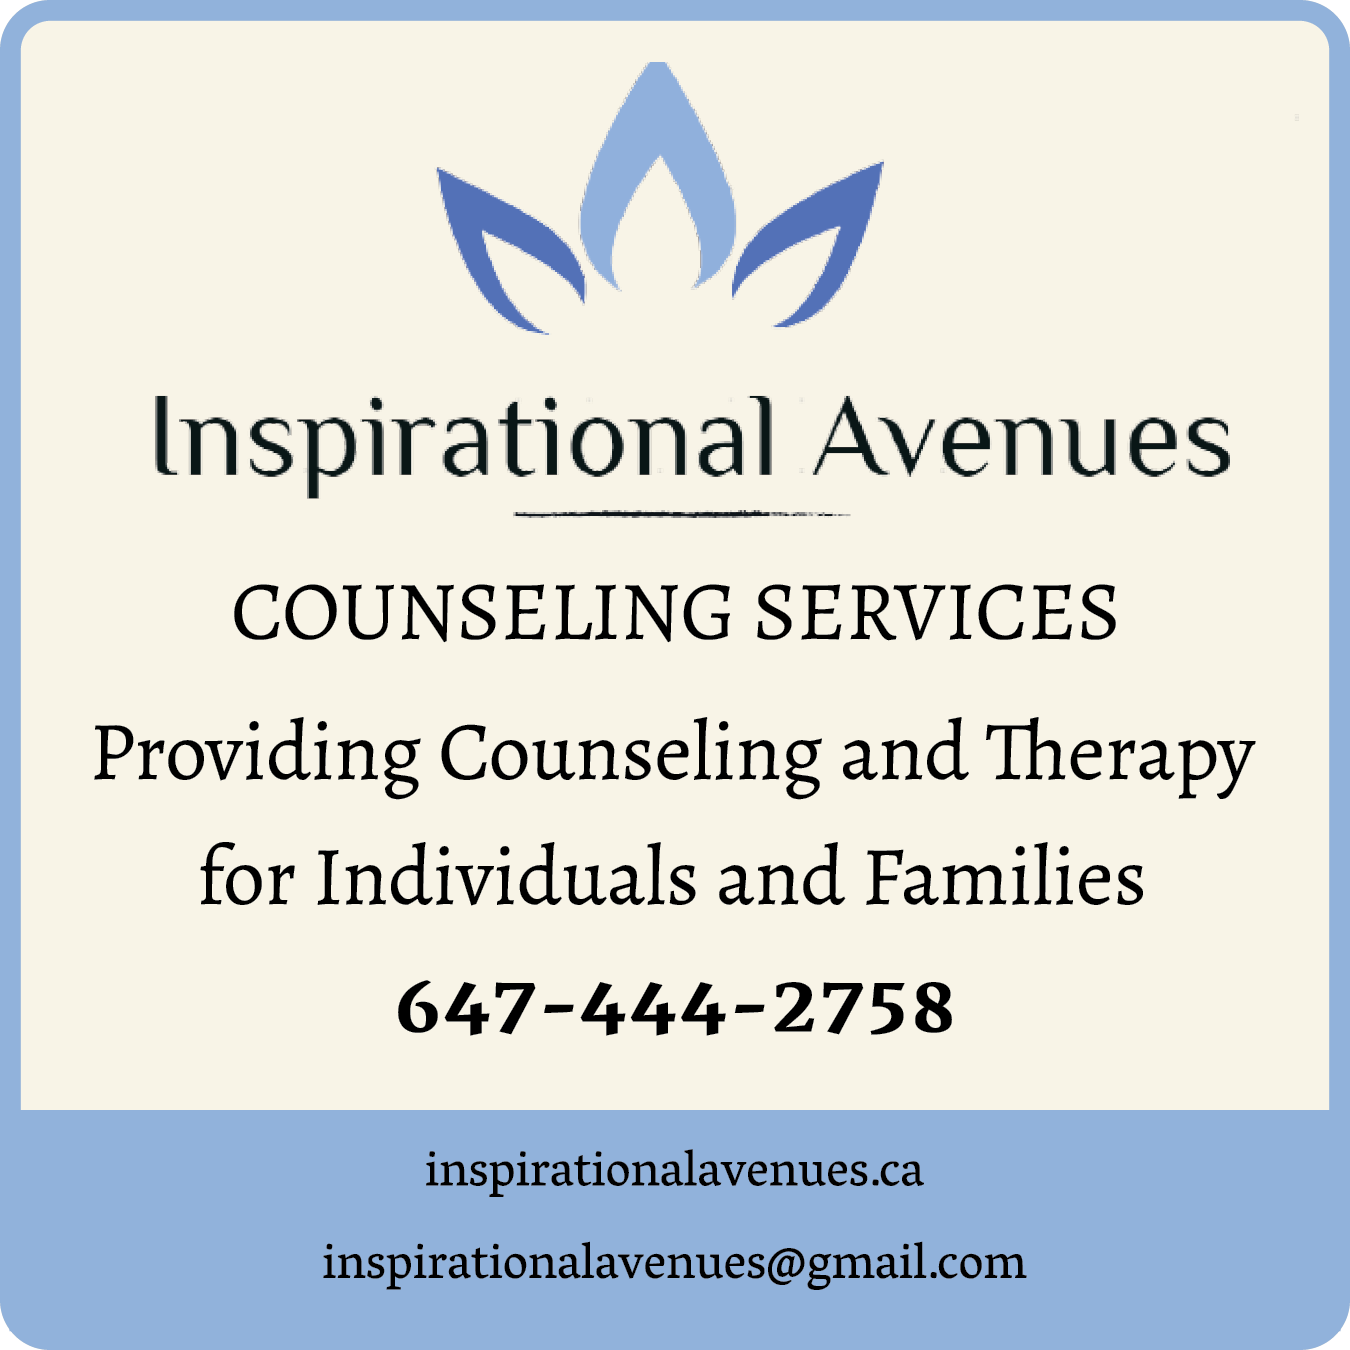 Inspirational Avenues Counselling Services